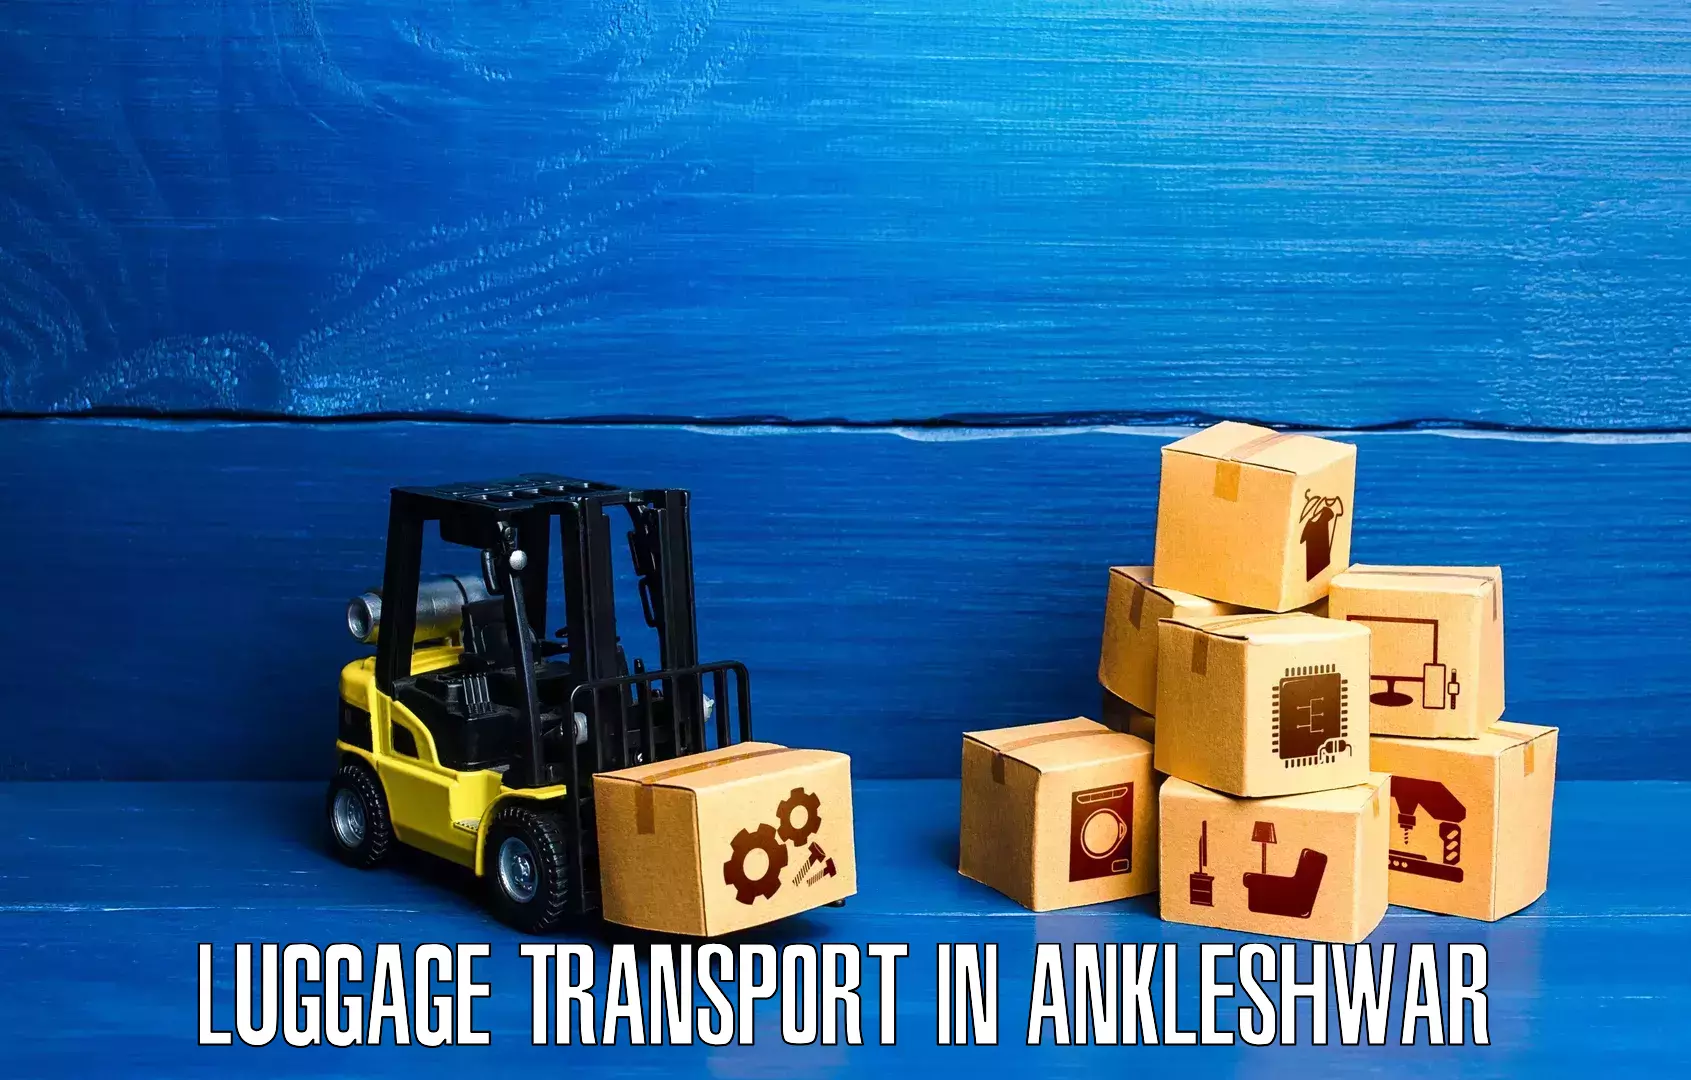 Luggage transport company in Ankleshwar